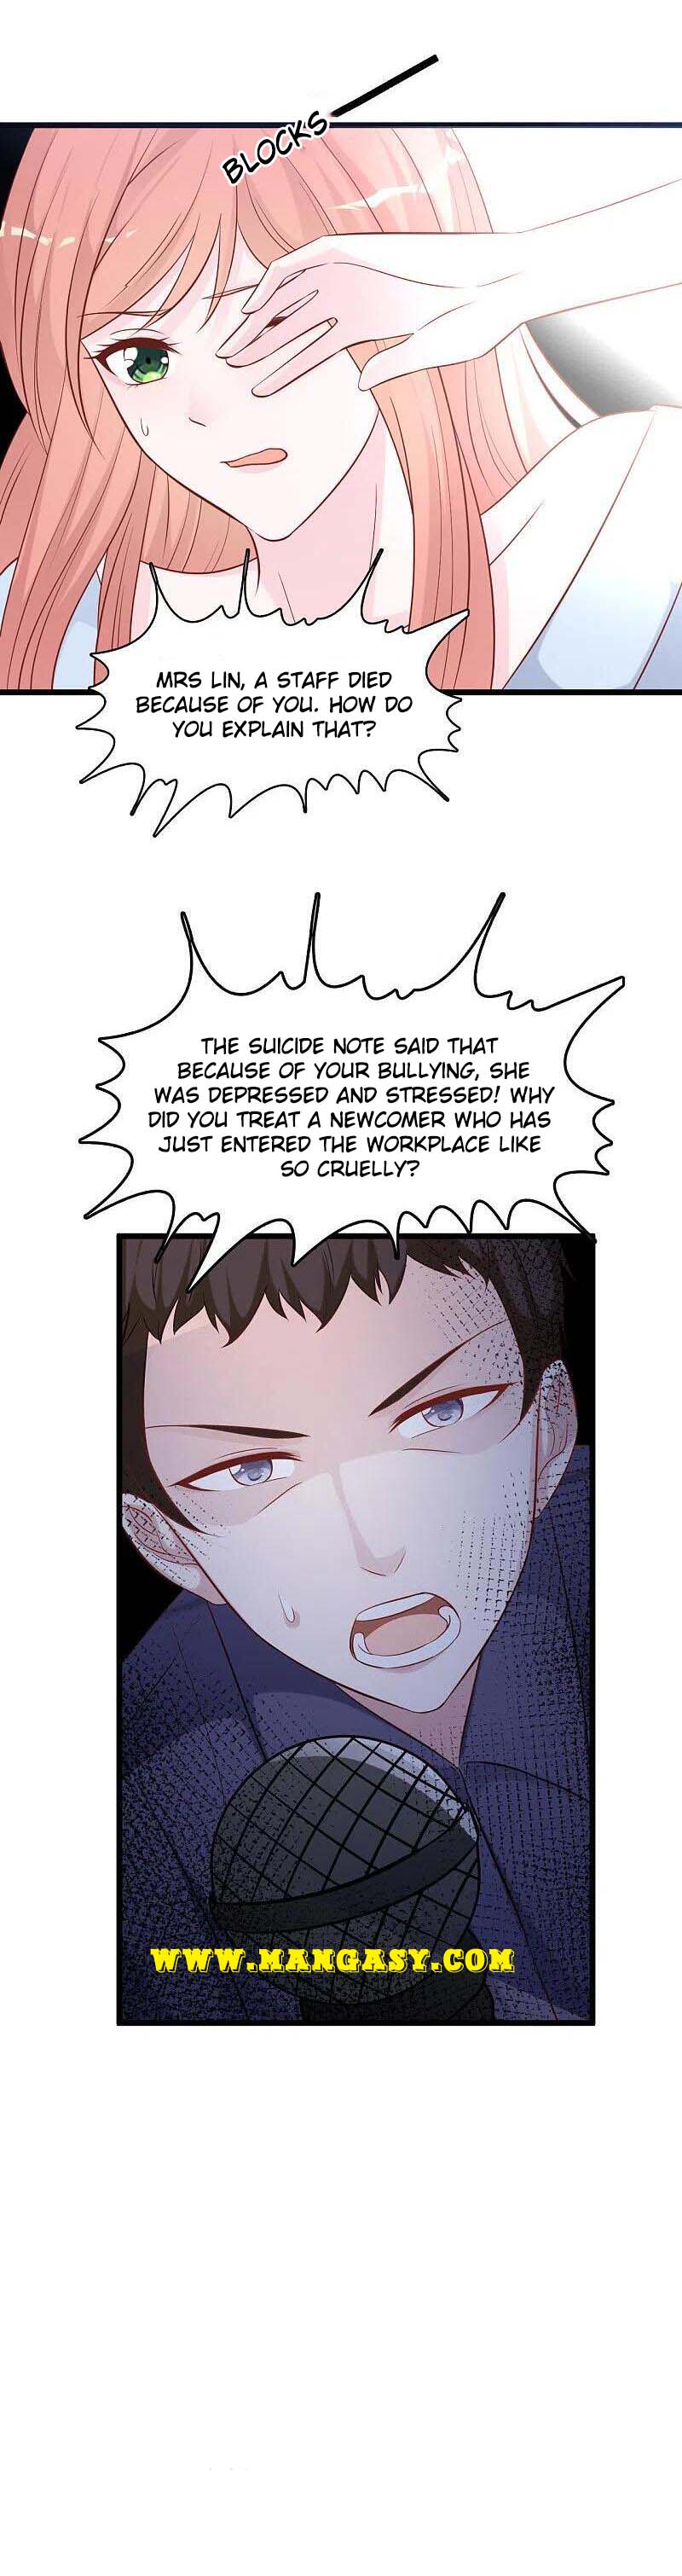 President Daddy Is Chasing You Chapter 154 - HolyManga.net